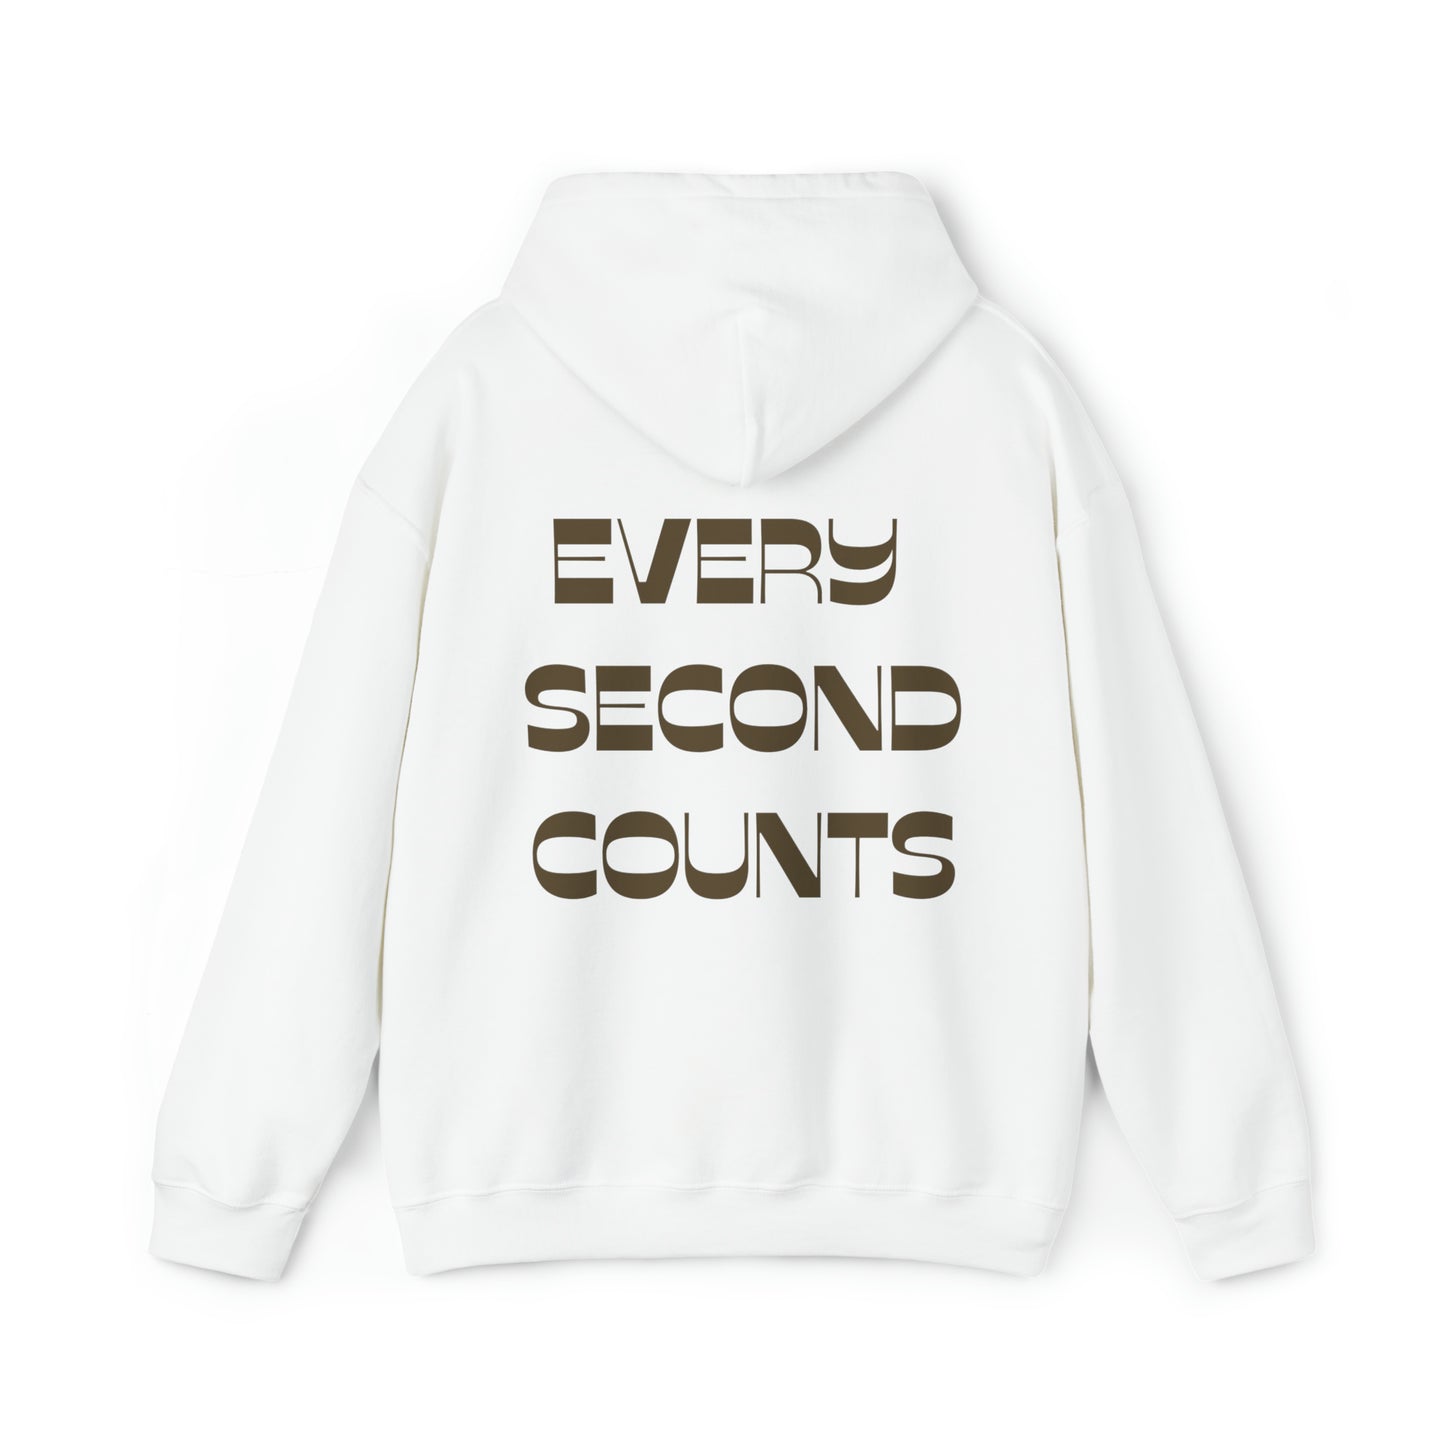 Finley Caringer: Every Second Counts Hoodie